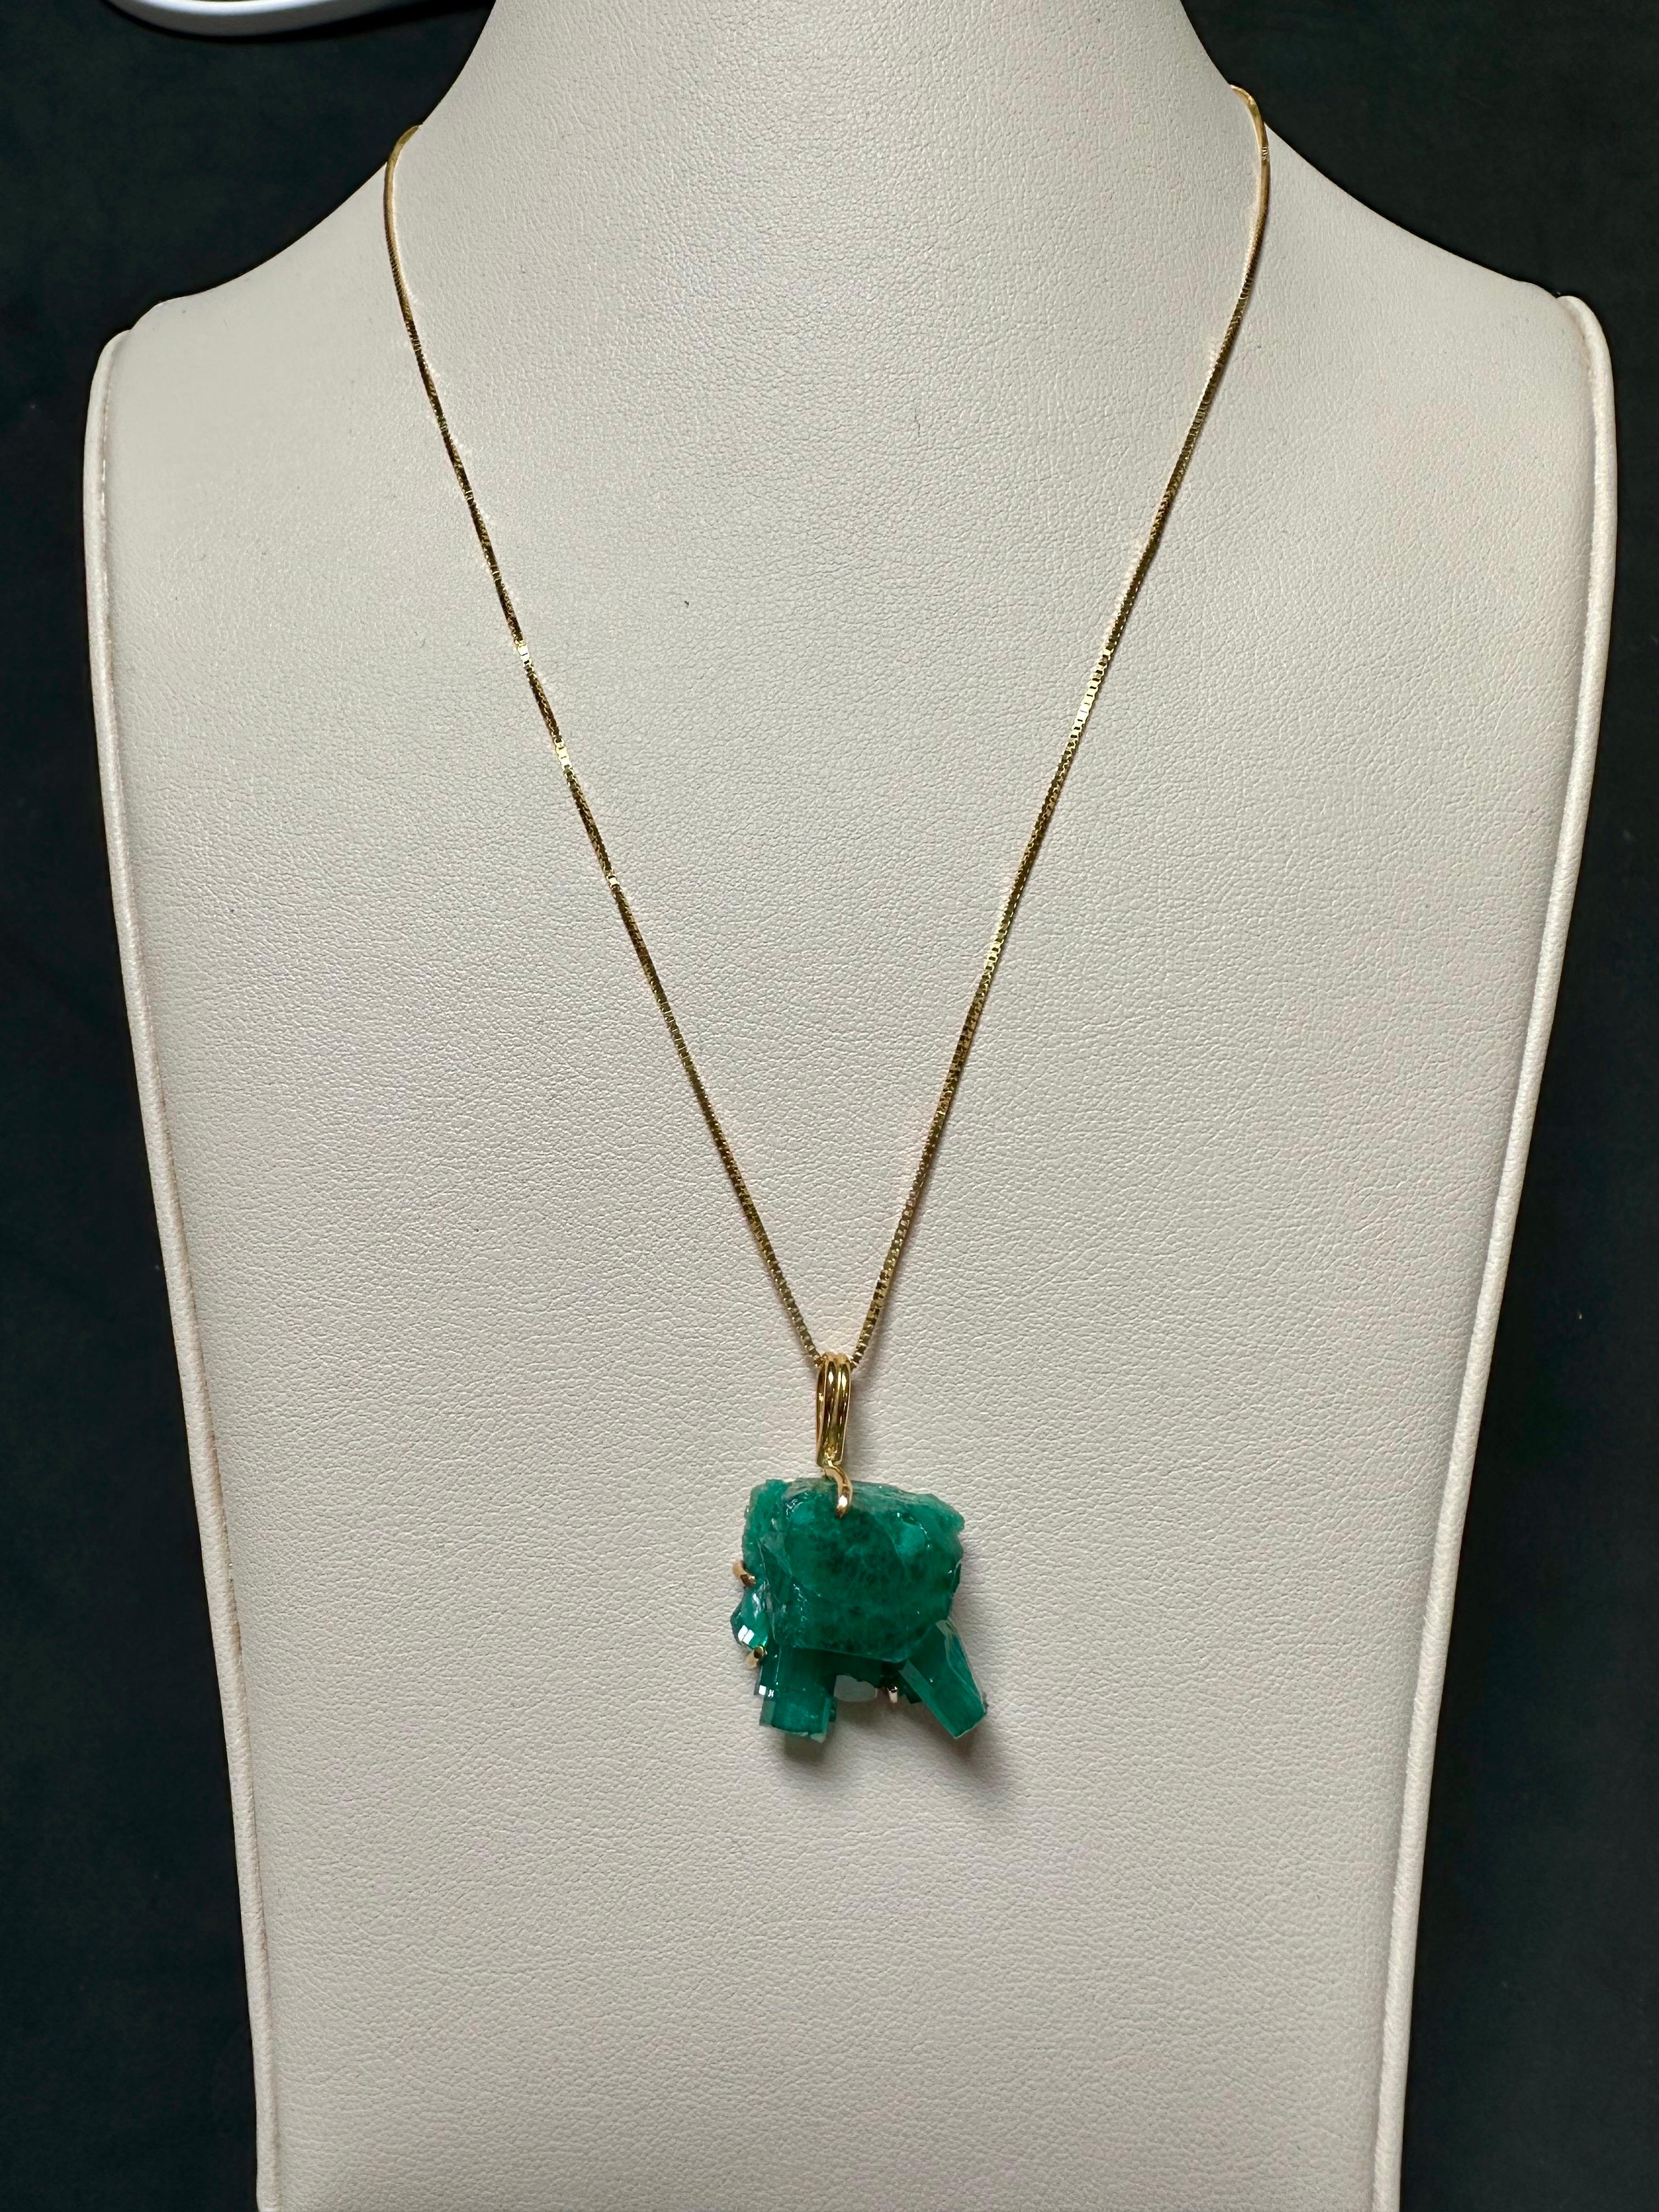 25 Carat Colombian Emerald Rough Pendent/Necklace 18 Karat Gold with 18 KG Chain For Sale 8